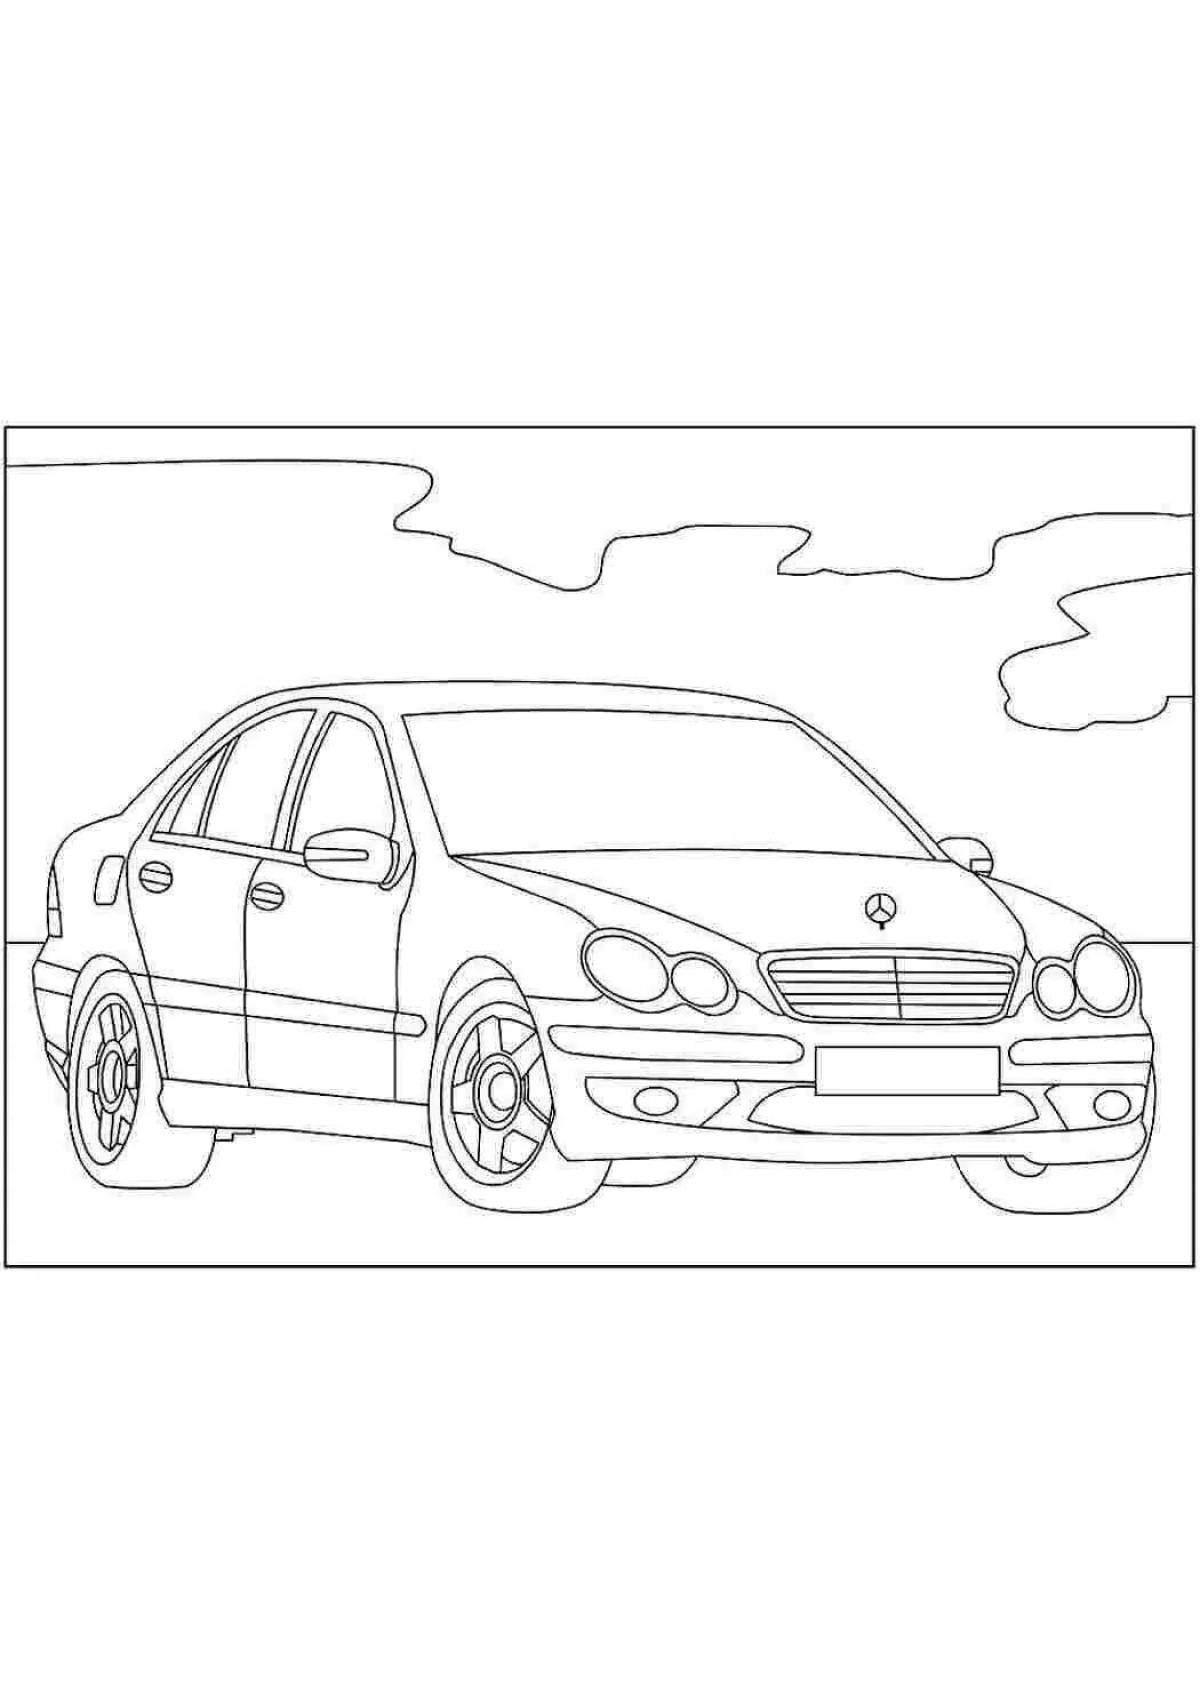 Spectacular Mercedes coloring for boys